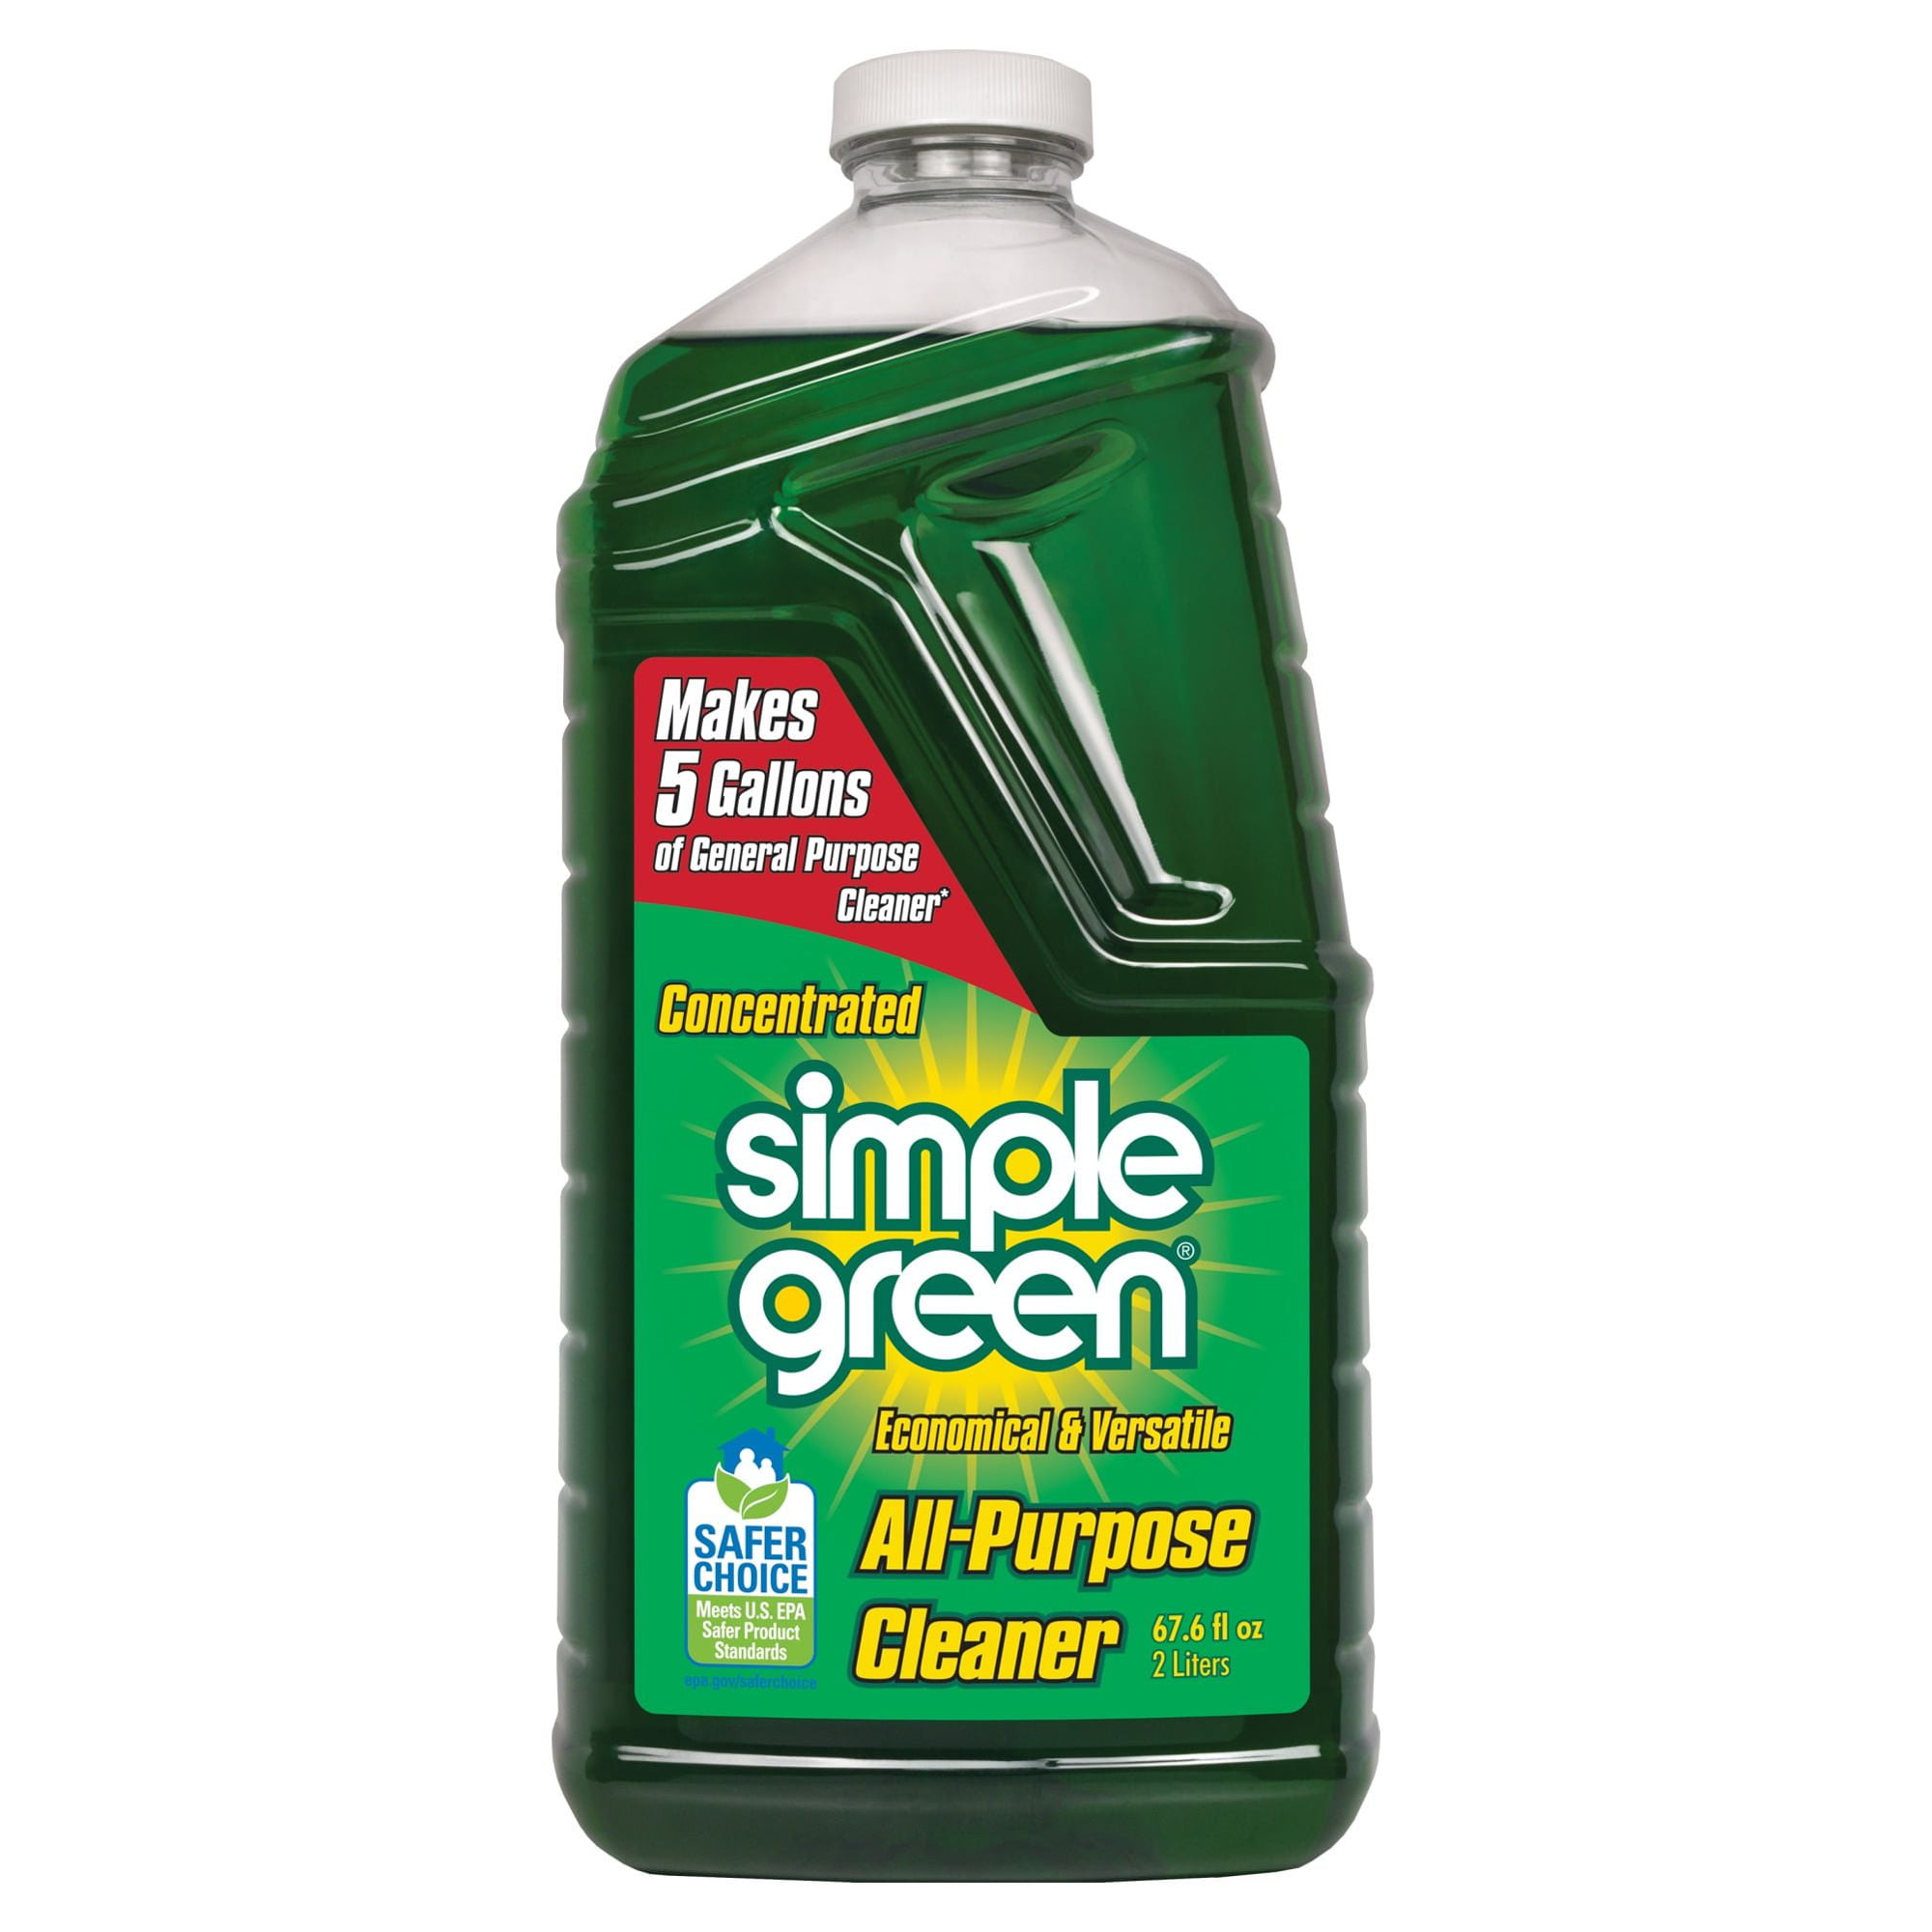 Simple Green All-Purpose Cleaner Concentrate Refill, Original, 67.6 fl. oz